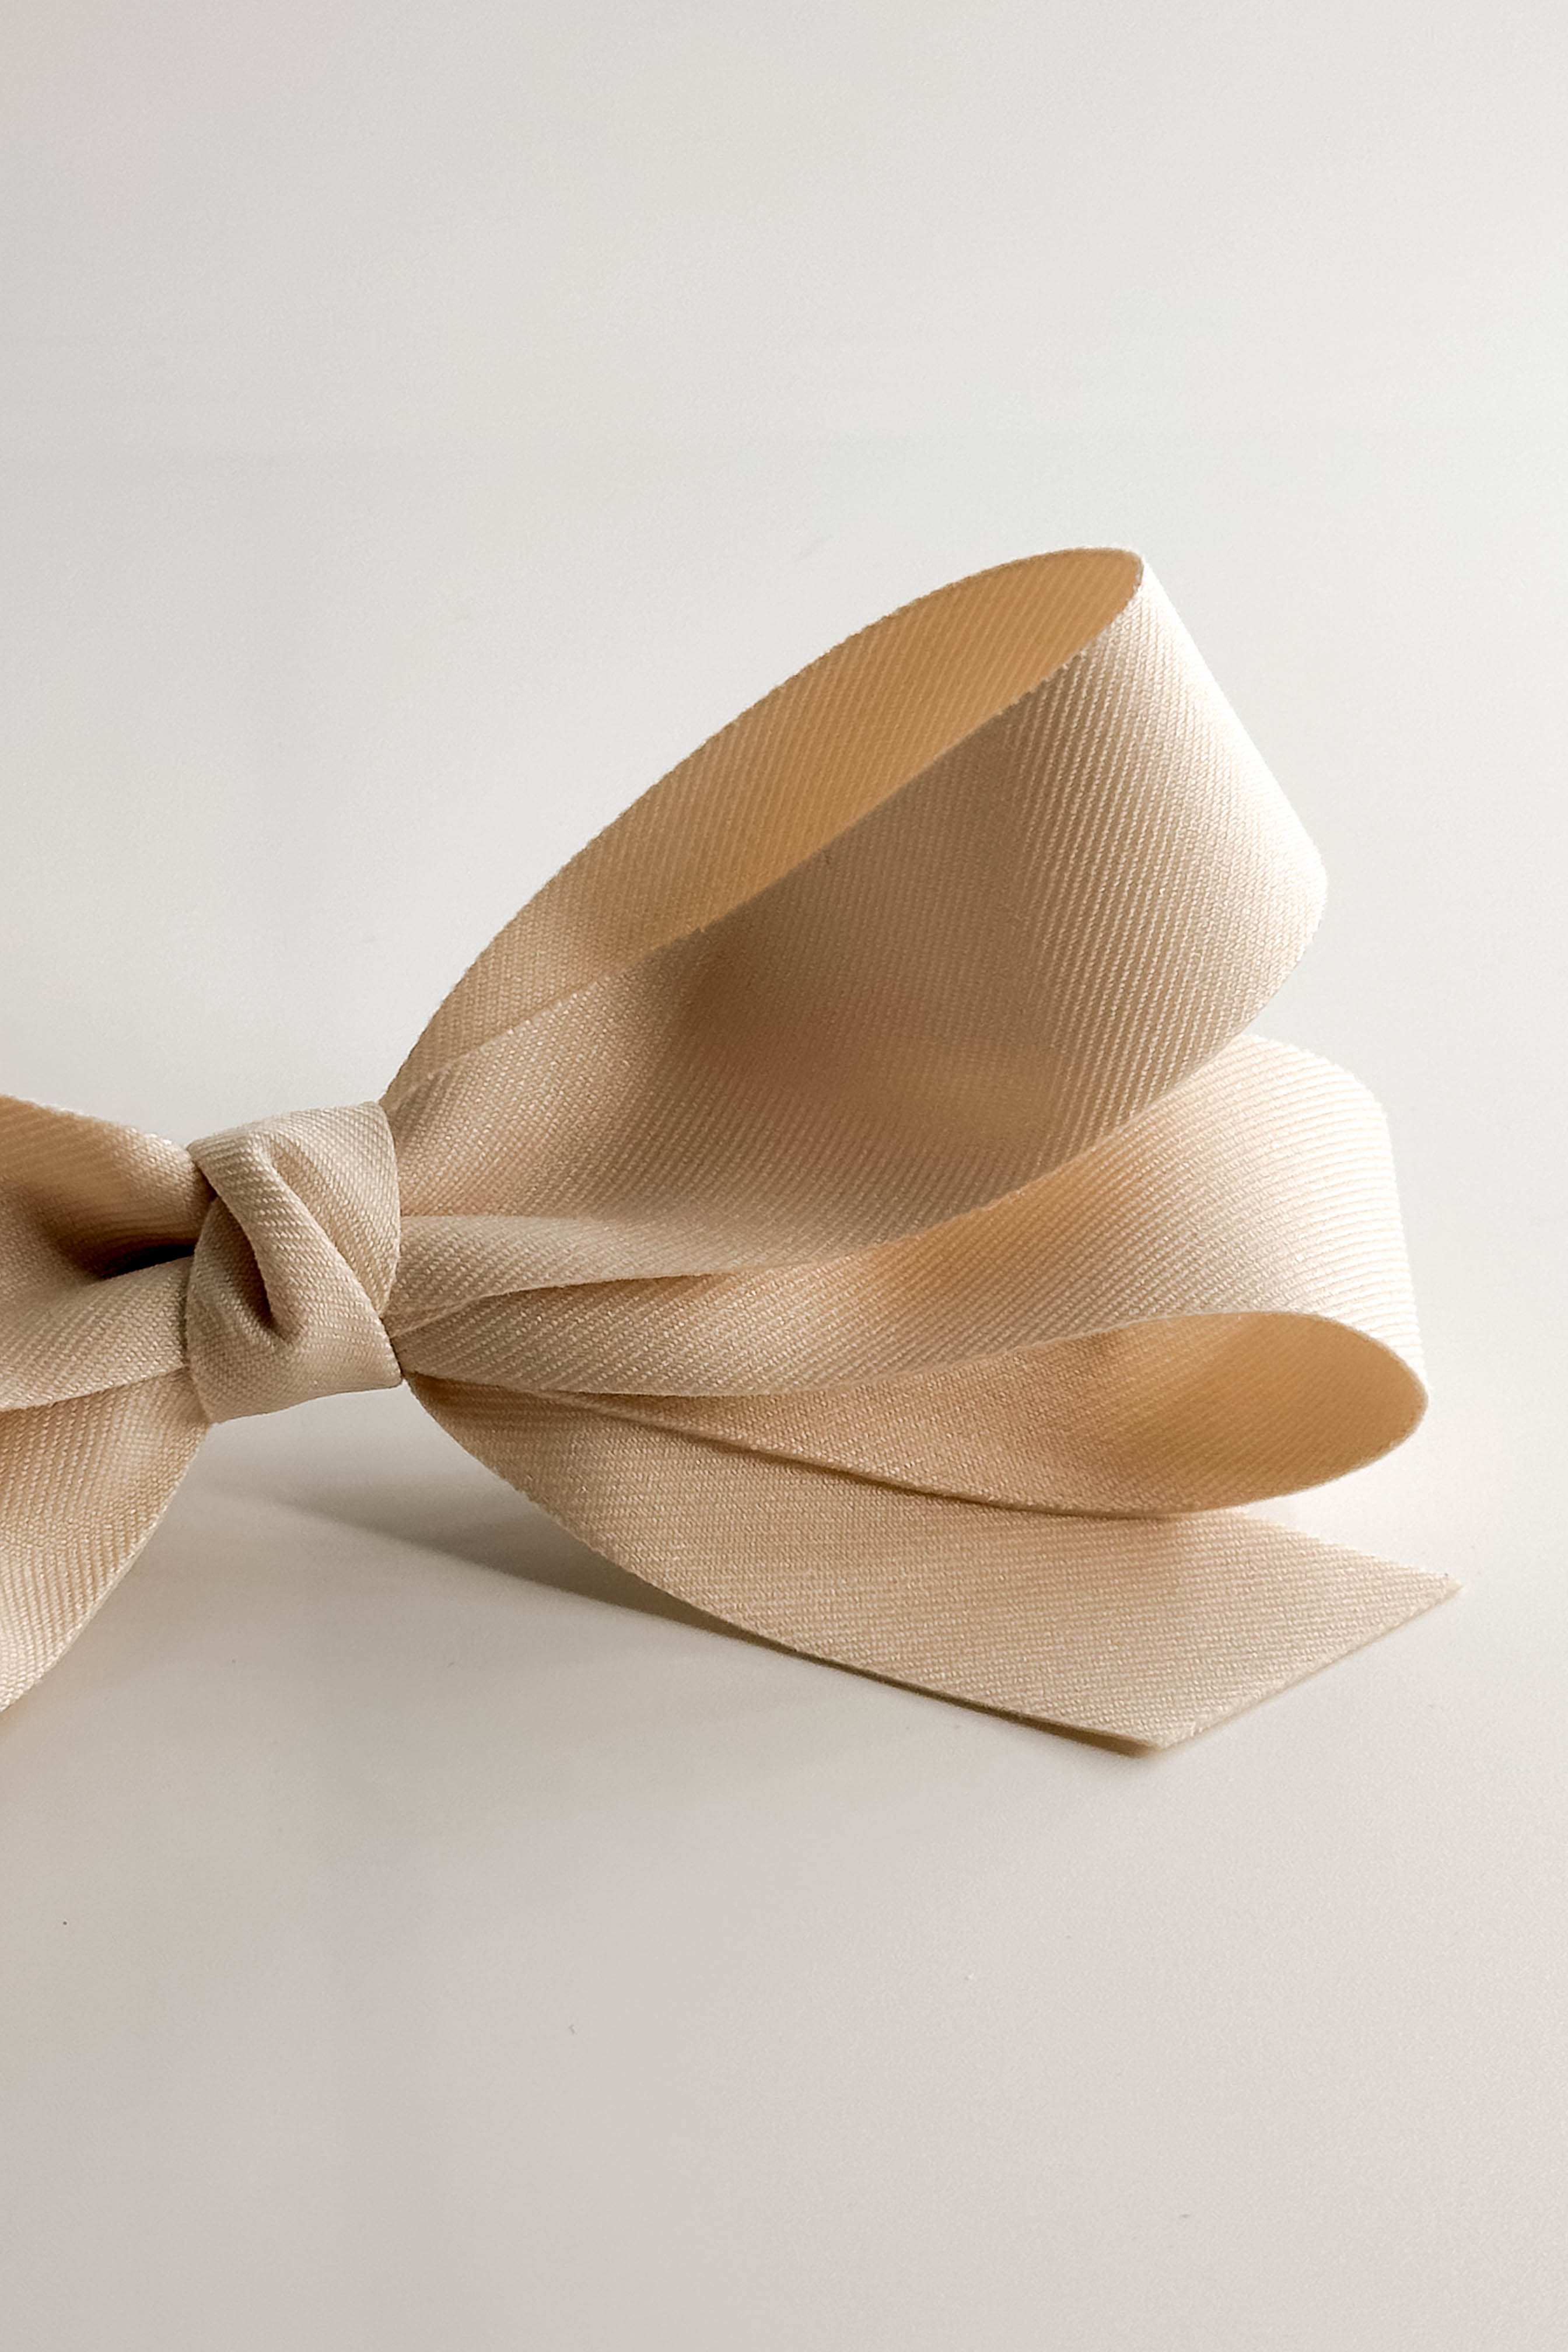 Close up view of Luna Hair Bow Barrette in Ivory which features small ivory, double bow with a french barrette clip